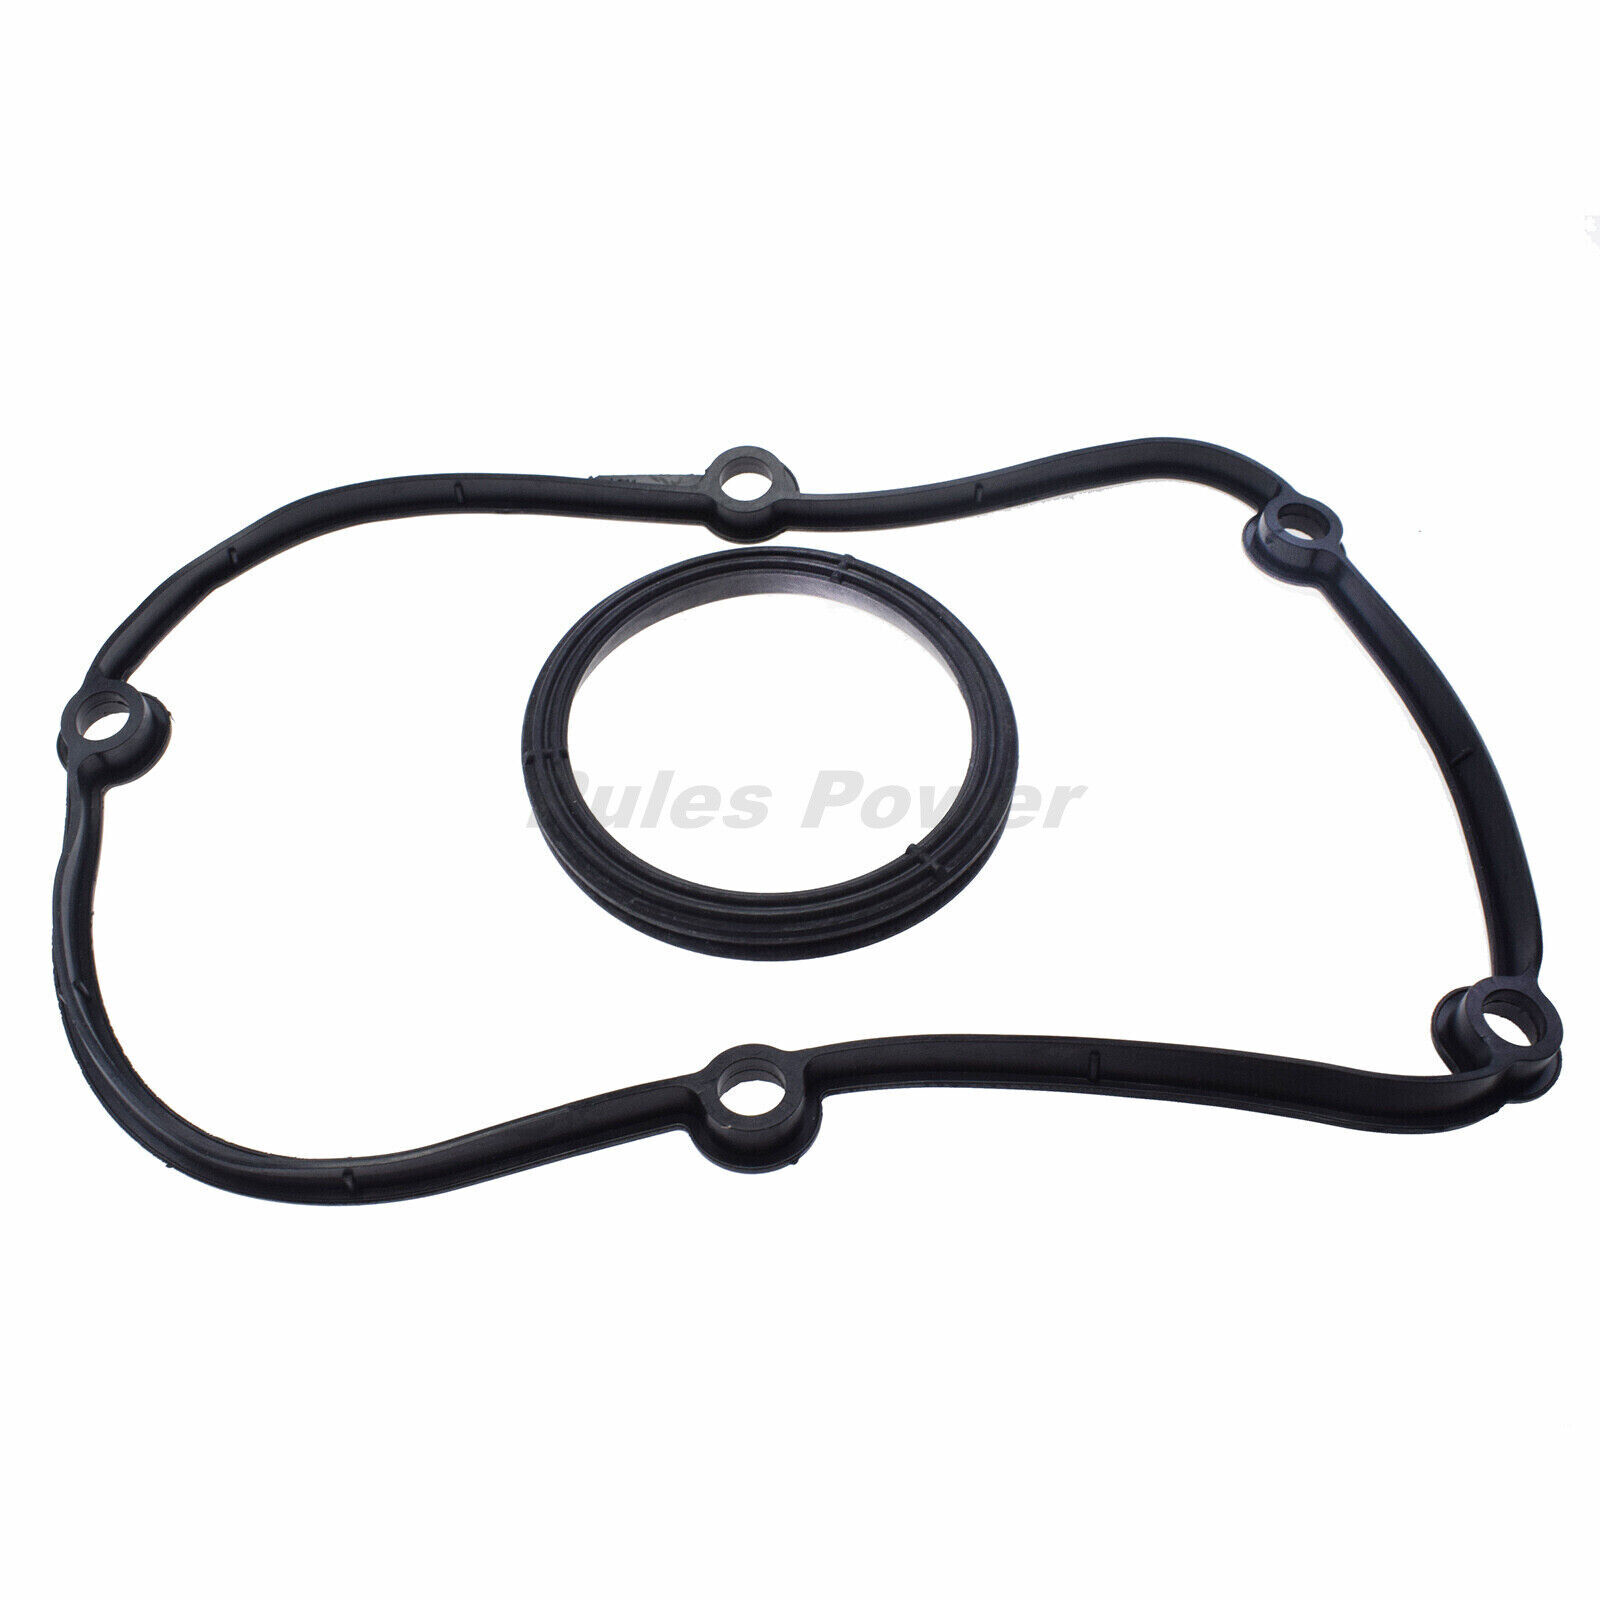 OEM Upper Timing Cover Gasket and Seal 06H103483C For VW CC Audi A4 2.0T